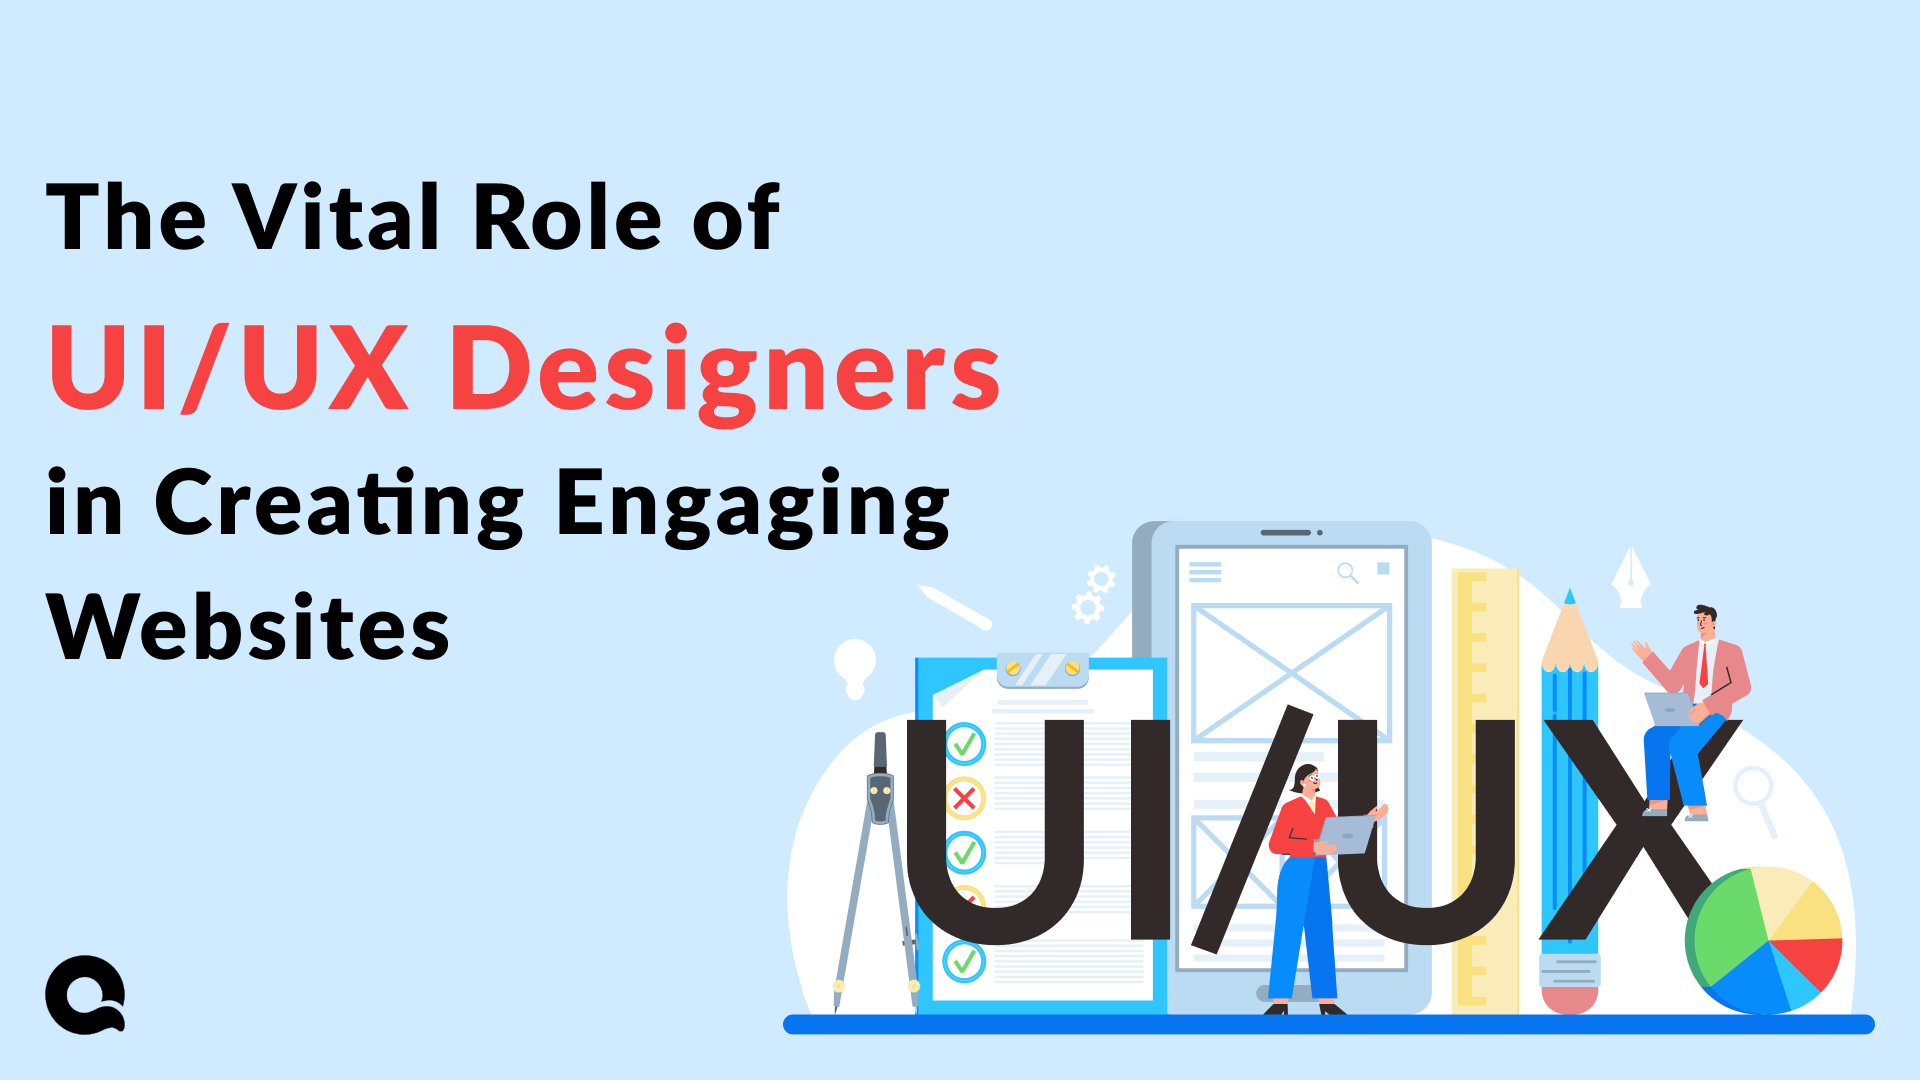 The Vital Role of UI/UX Designers in Creating Engaging Websites